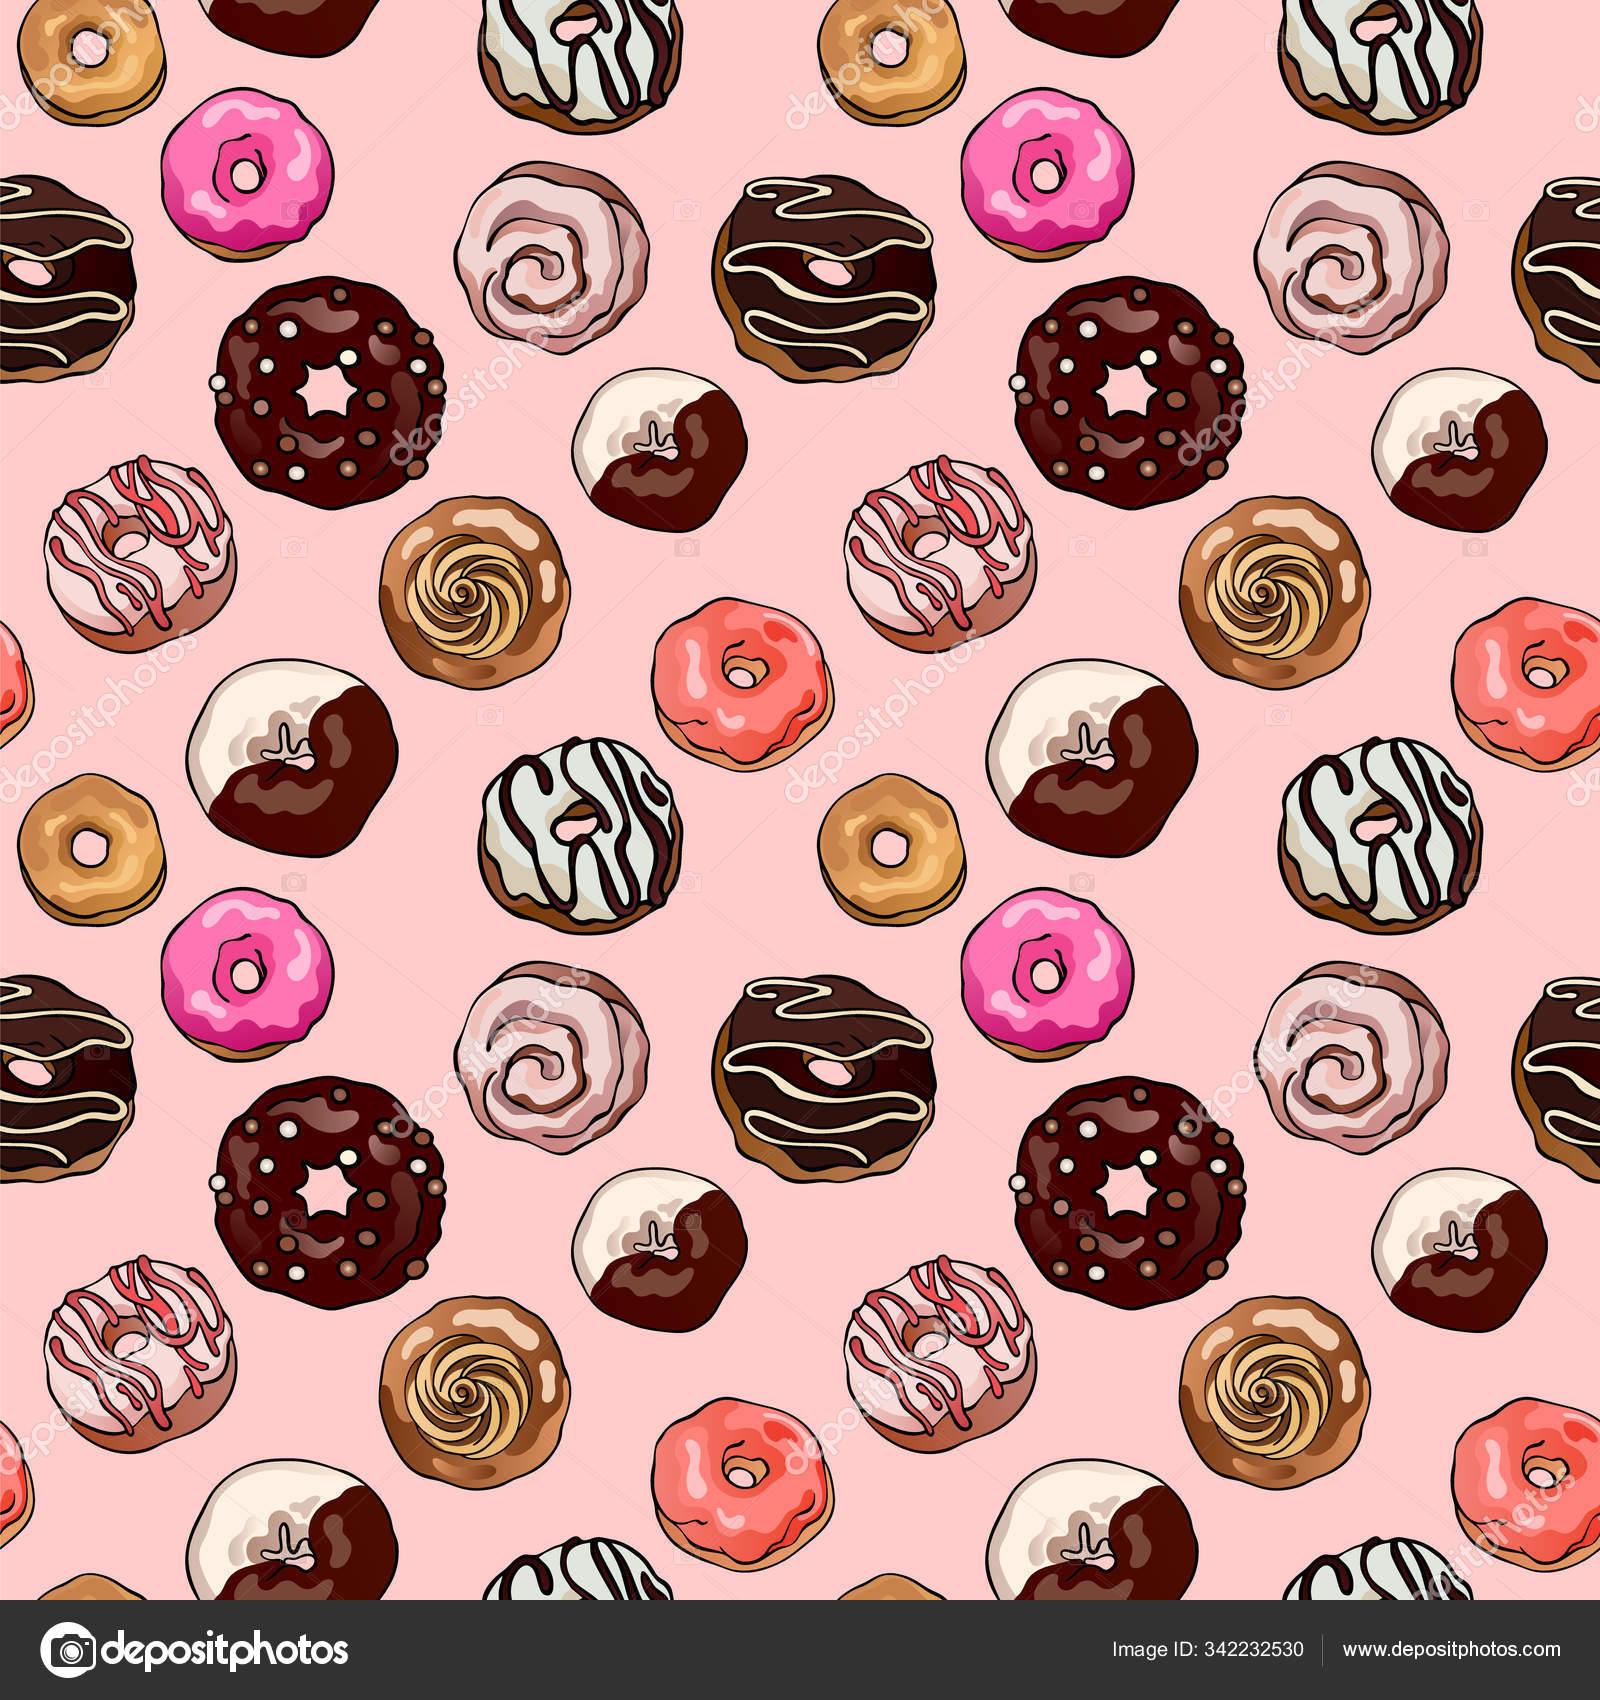 Assorted chocolate and glazed donuts vector pattern colorful drawings of sweet cafe bakery pastry food illustration for gift wrapping fashion textile print wallpaper menu design stock vector image by natalyavolodeva